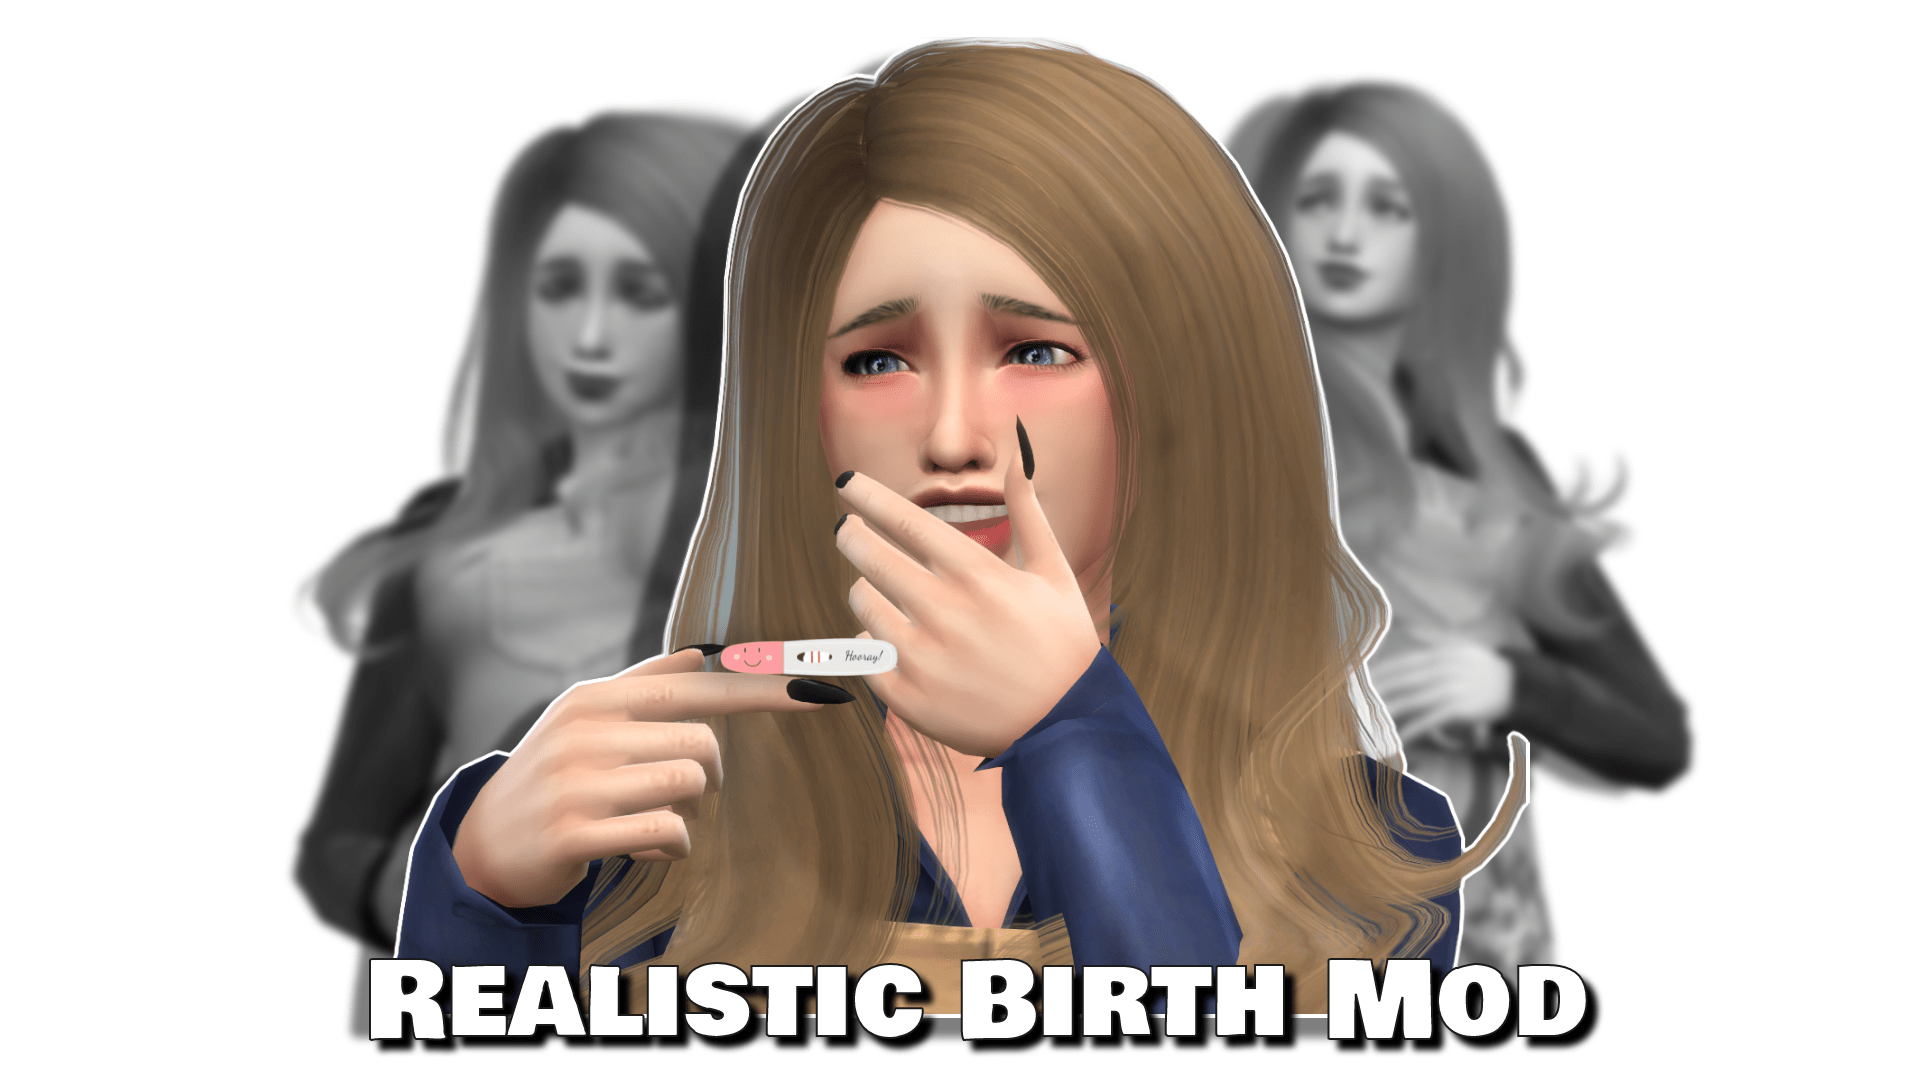 15+ Best Sims 4 Pregnancy Mods You Need to Download for More Realistic  Pregnancies - Must Have Mods